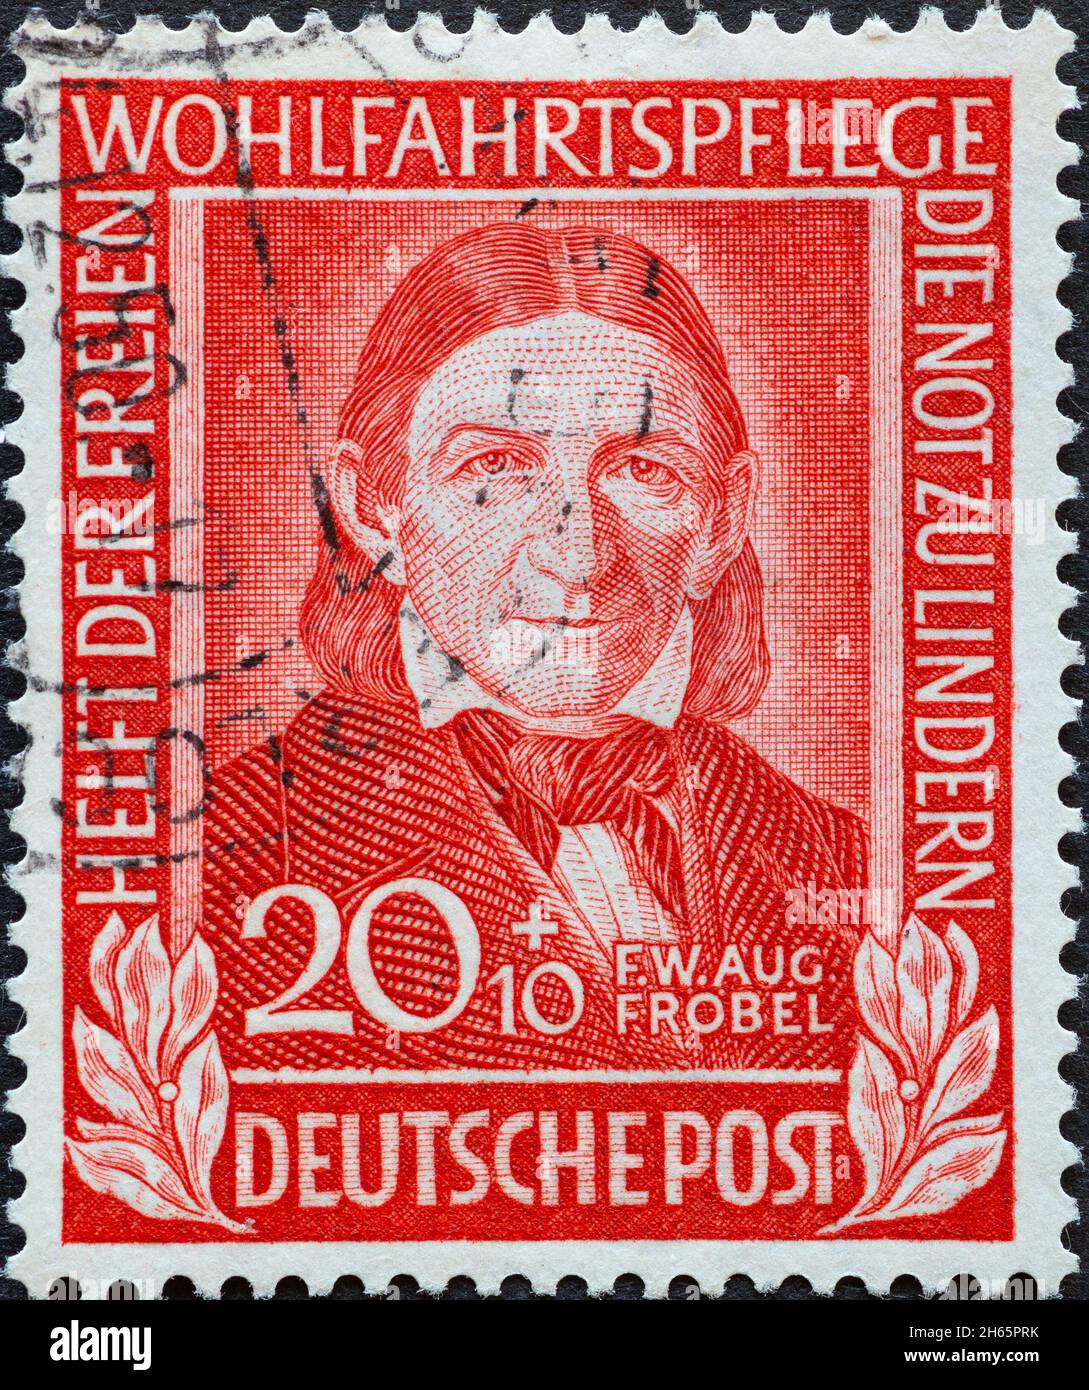 GERMANY - CIRCA 1949: a postage stamp printed in Germany showing an image of Friedrich Wilhelm August Froebel, circa 1949. Stock Photo